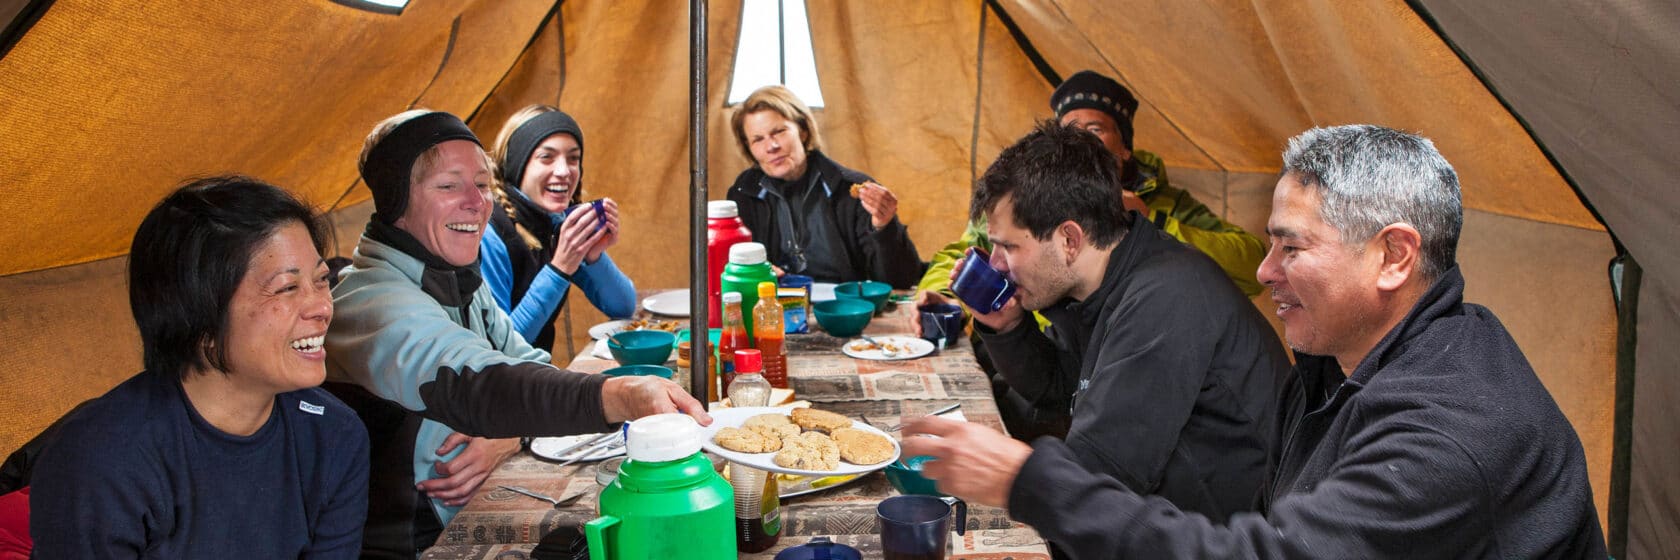 A group of travelers in Kilimanjaro enjoying a meal together.